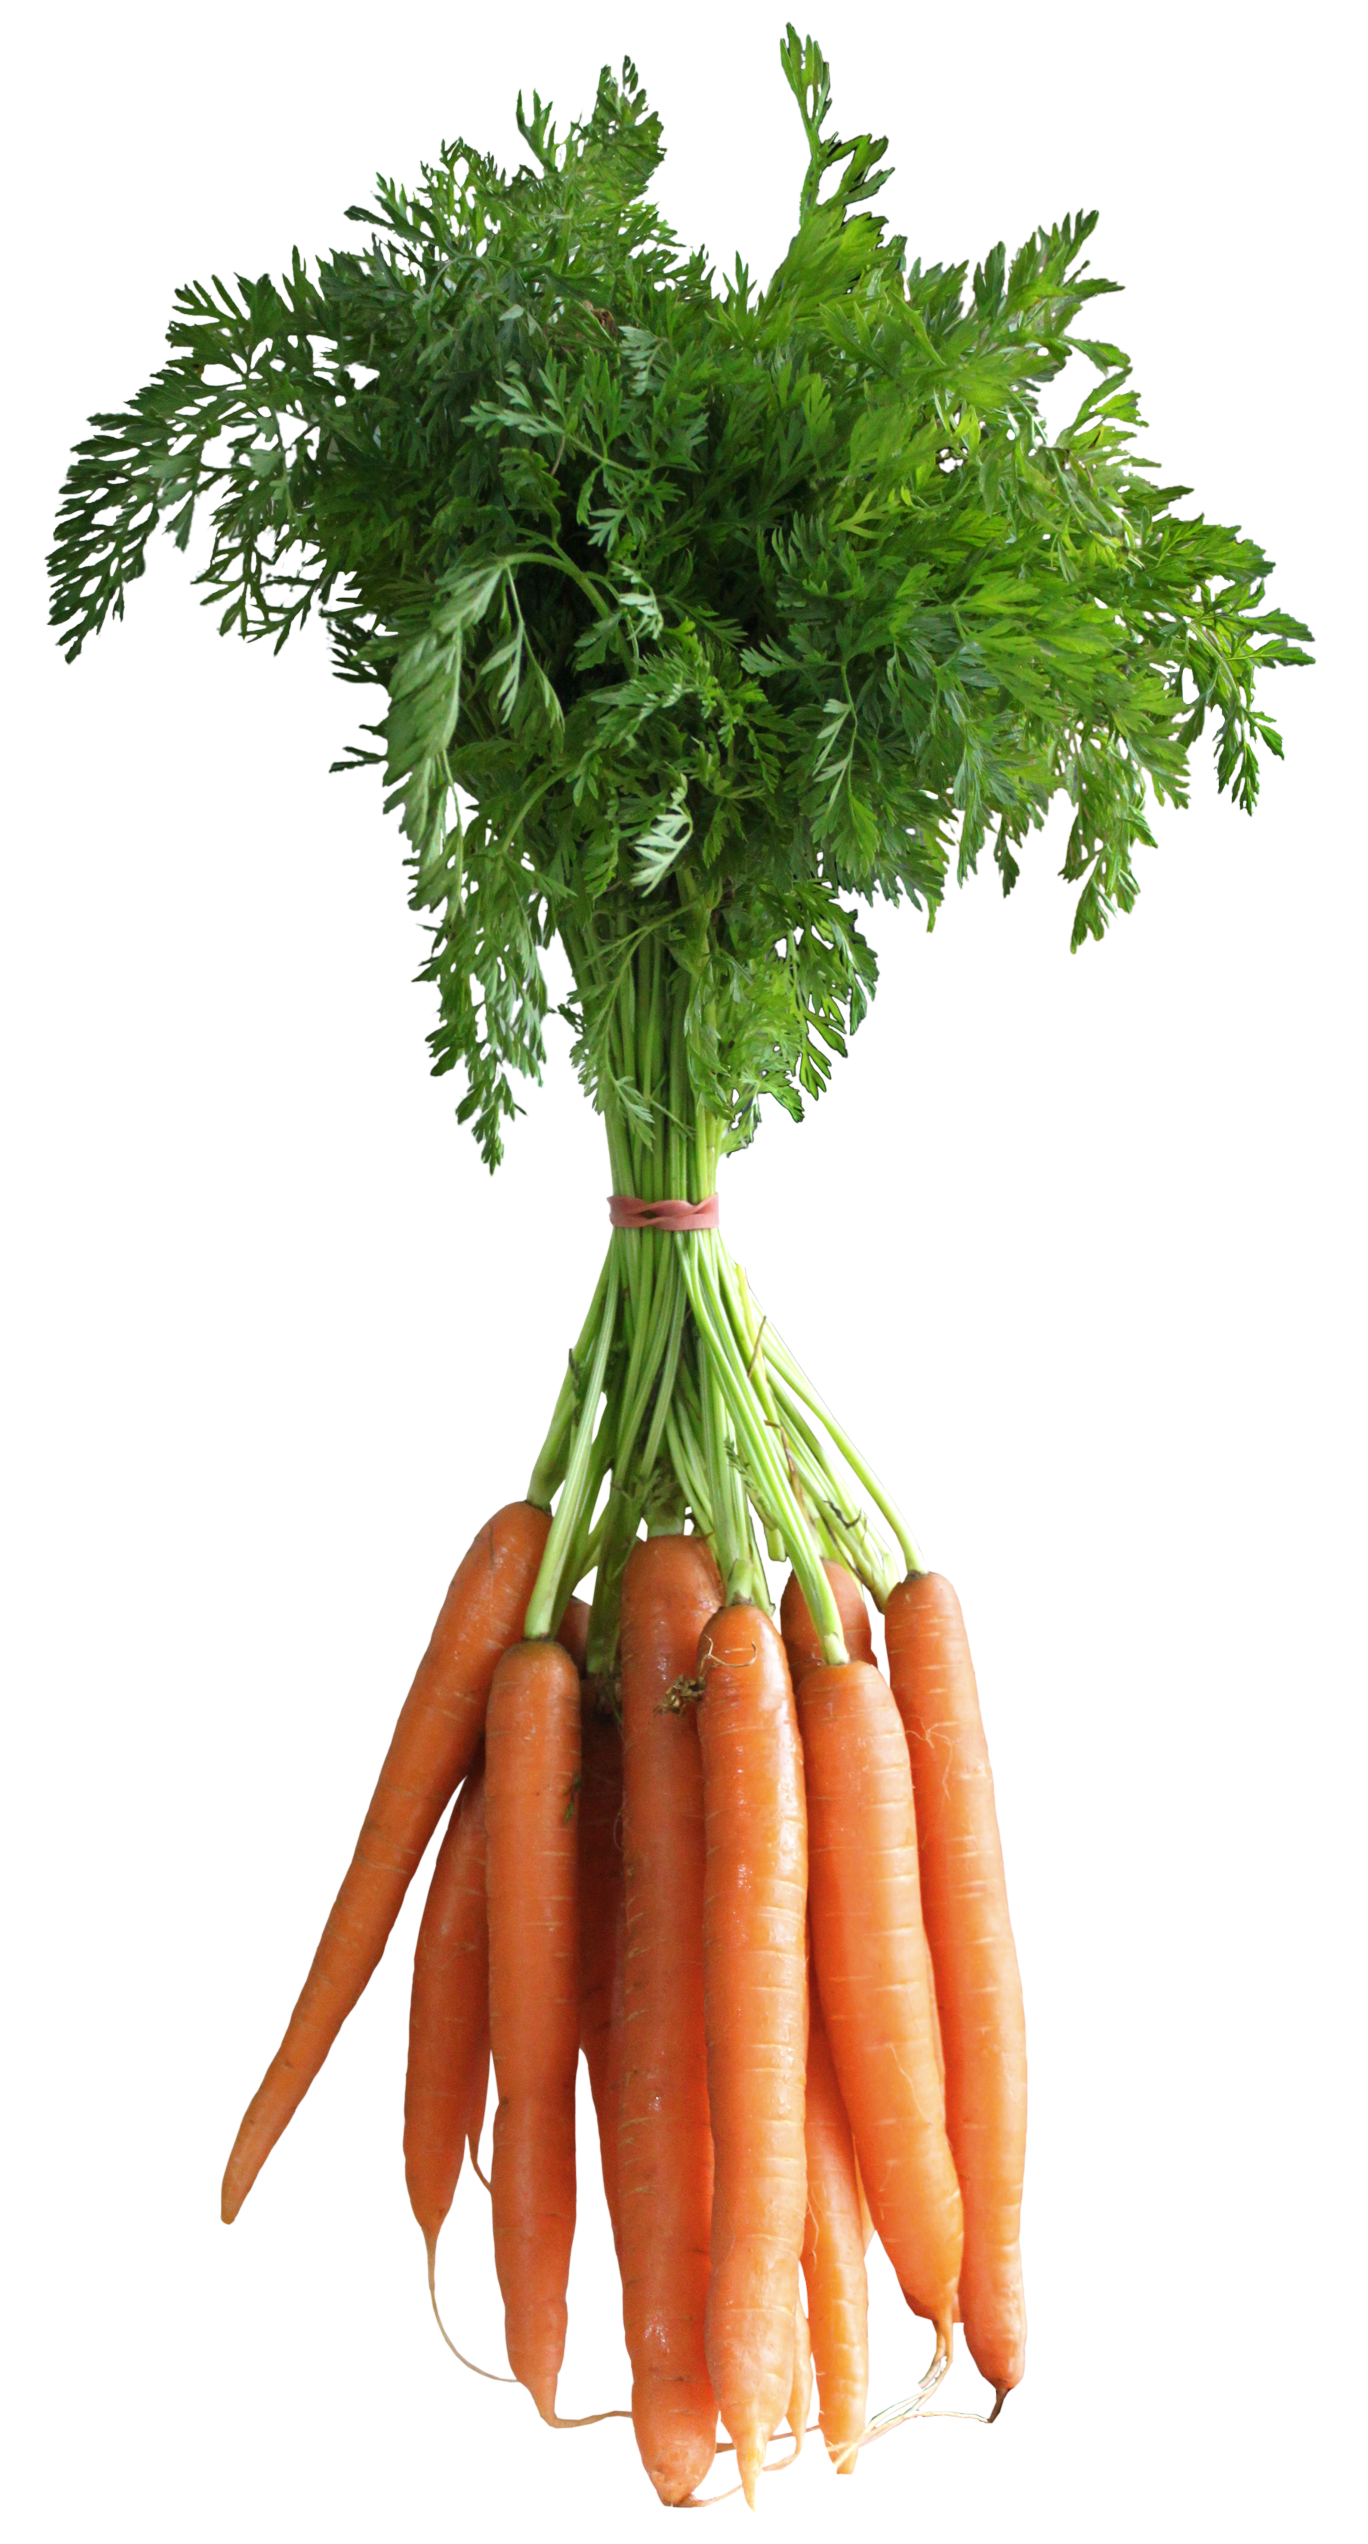 Free Carrot PNG Transparent Images, Download Free Carrot PNG